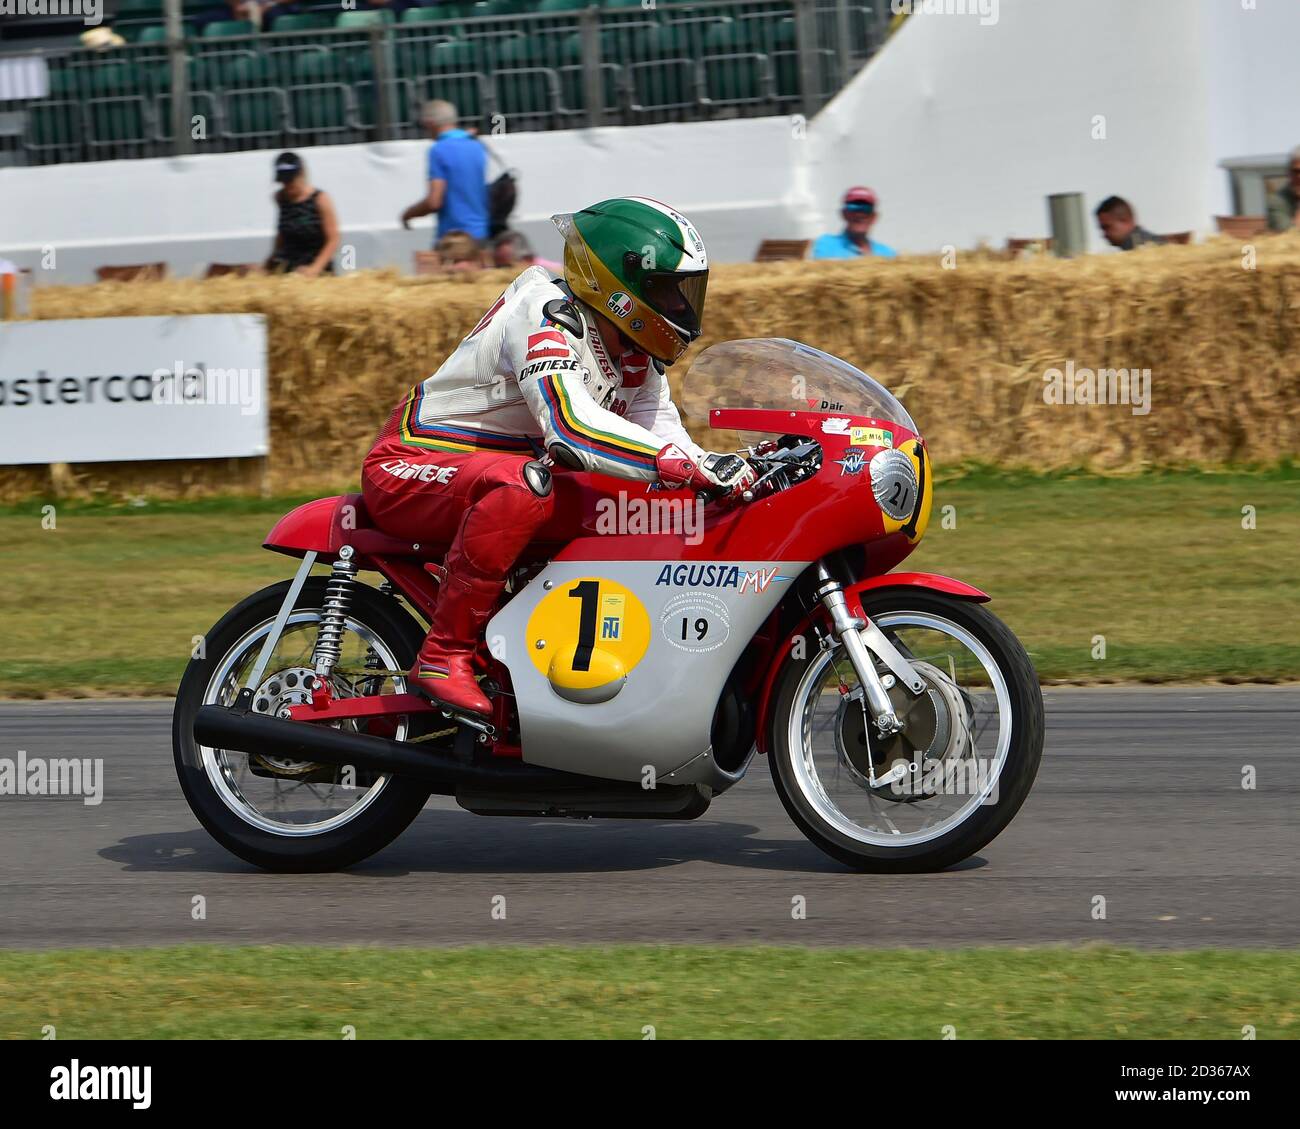 Giacomo Agostini, MV Agusta 500, Classic racing motorcycles, Goodwood Festival of Speed, Speed Kings, Motorsport's Record Breakers, Goodwood, July 201 Stock Photo